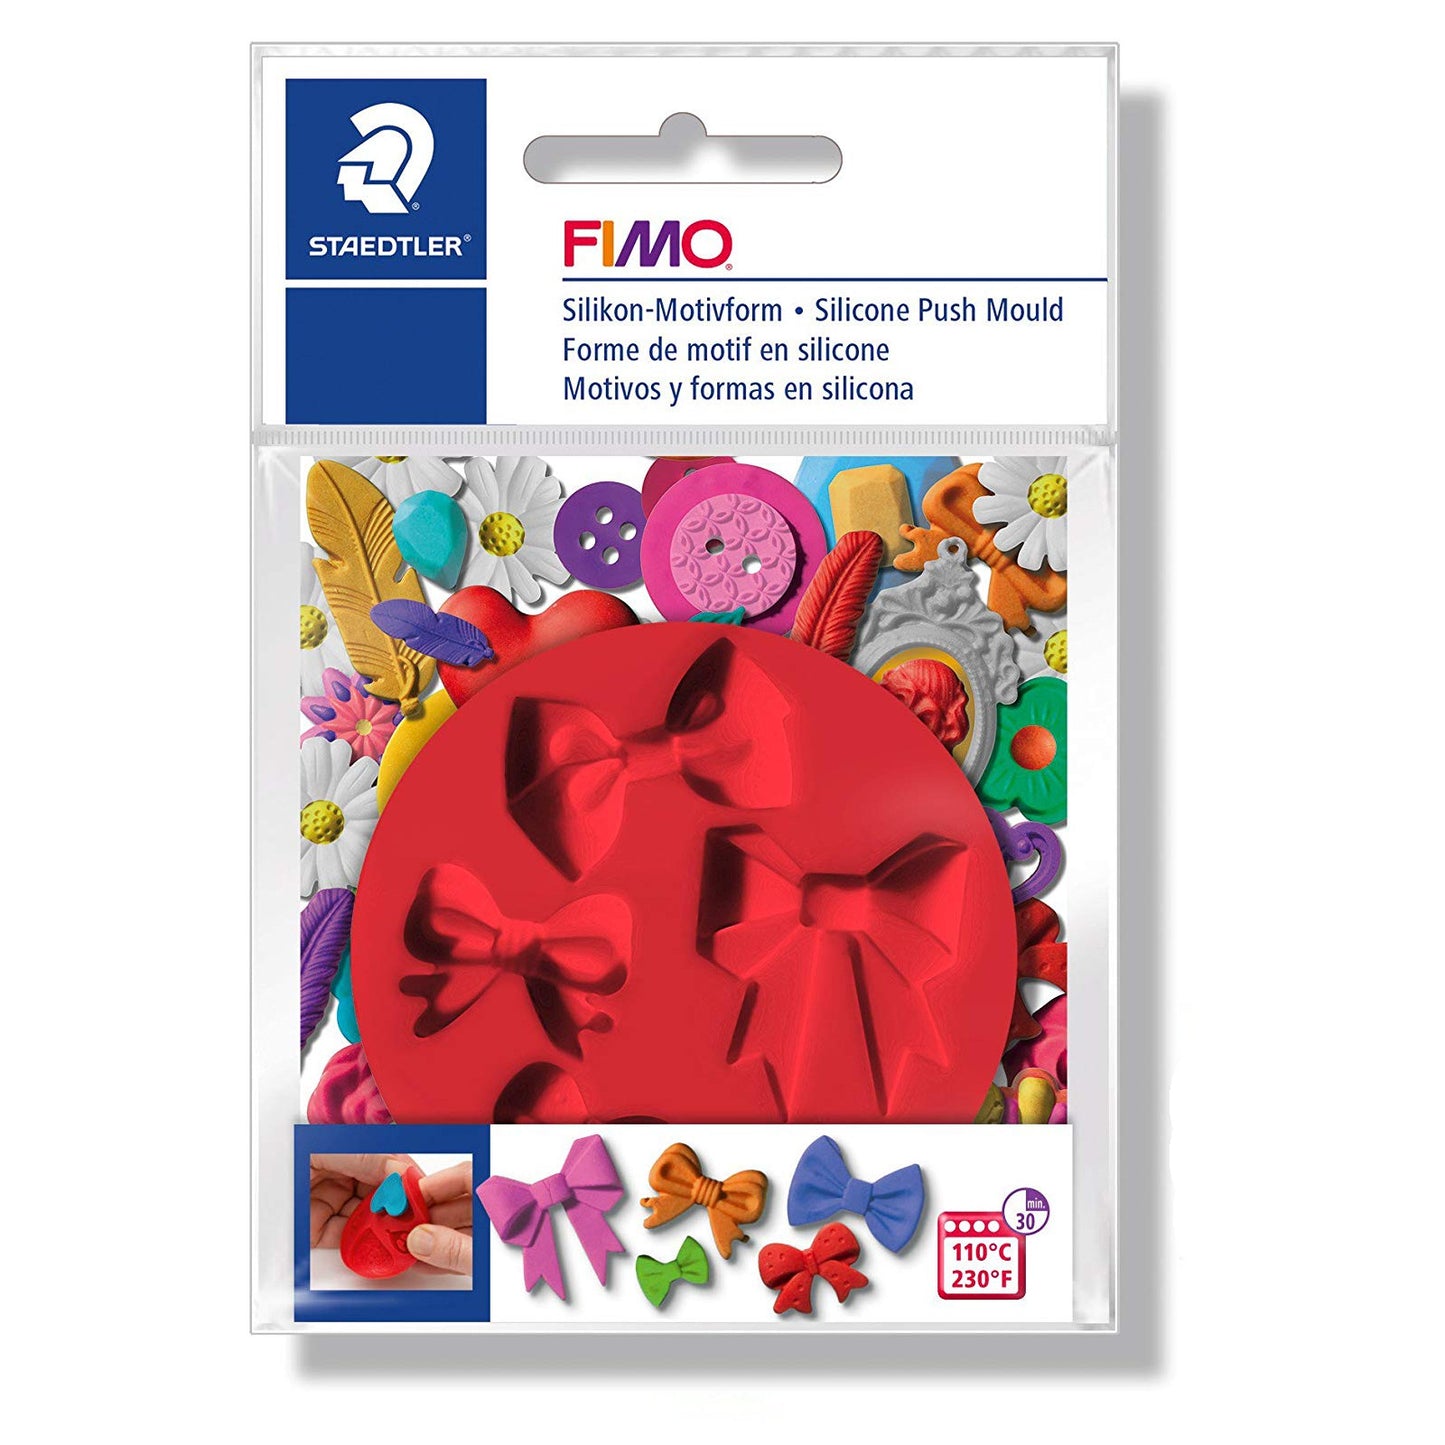 FIMO Push Modelling Clay Mould